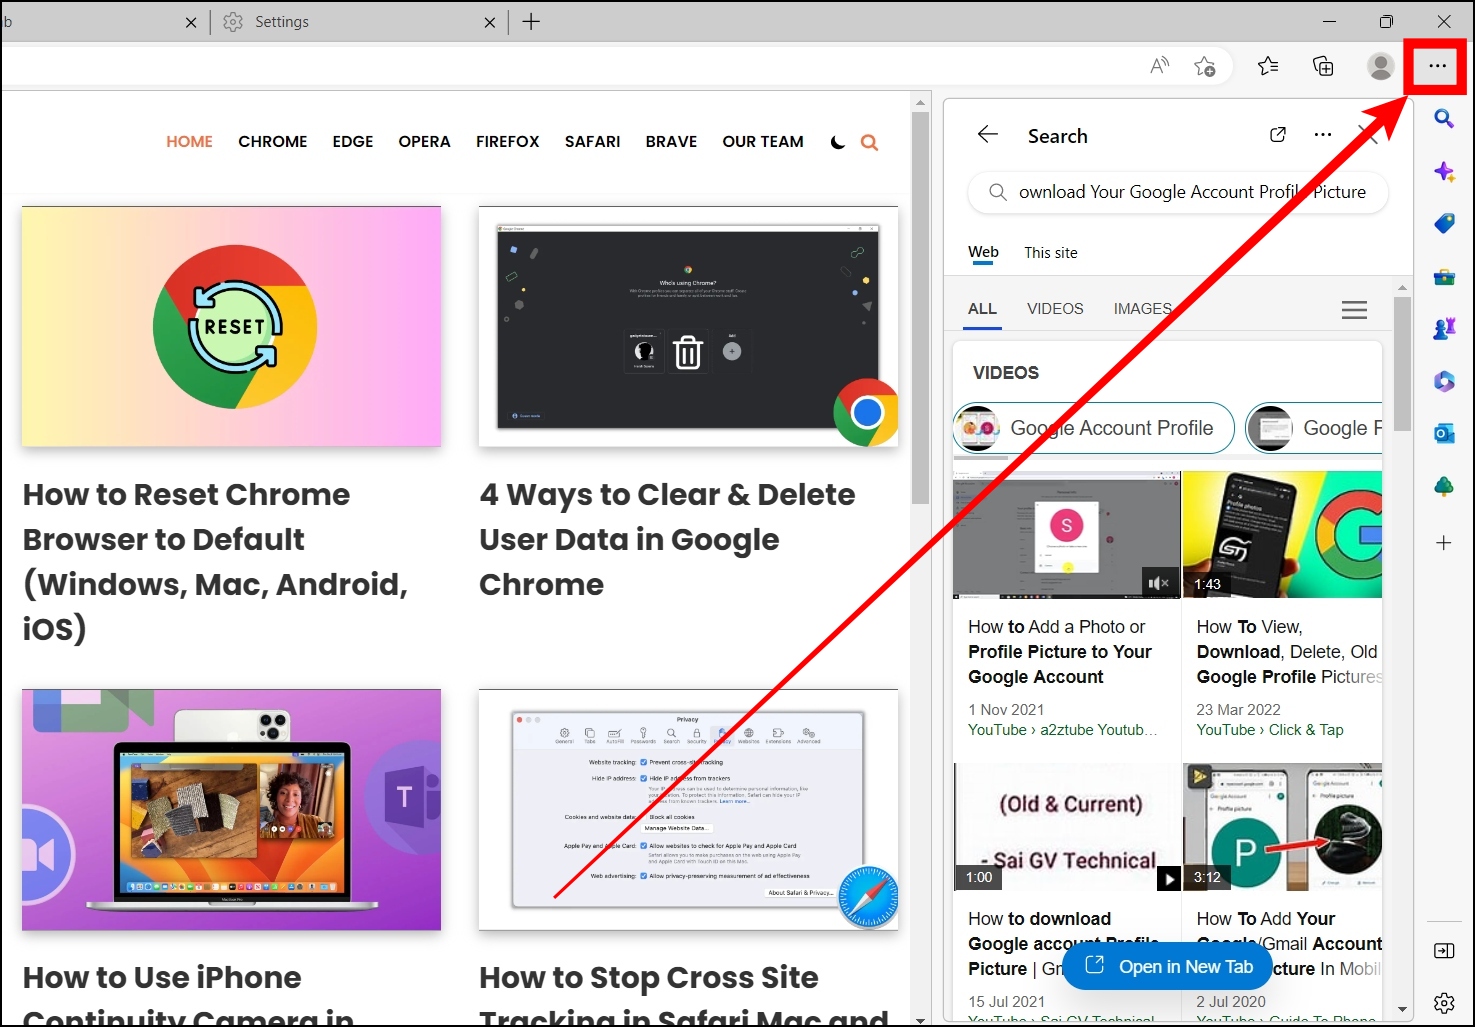 From Menu Options to Hide or Remove Bing Sidebar in Microsoft Edge